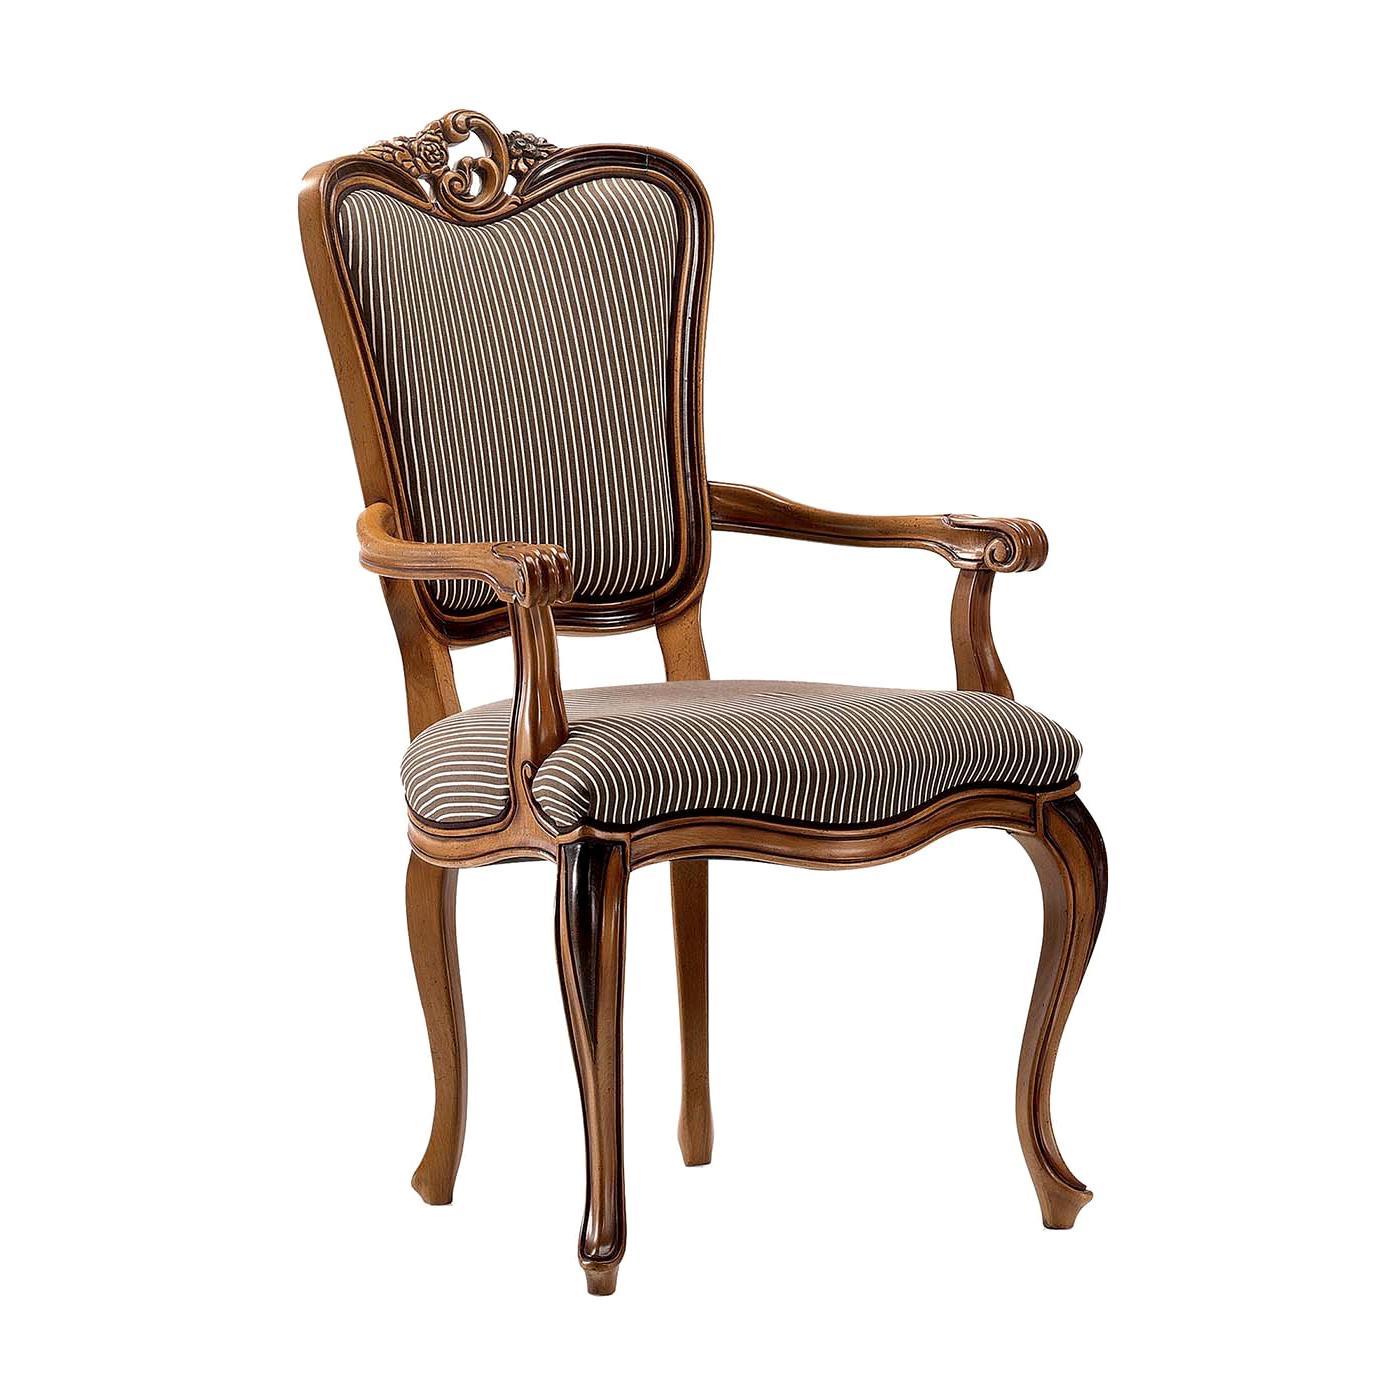 Thin-Striped Chair with Armrests